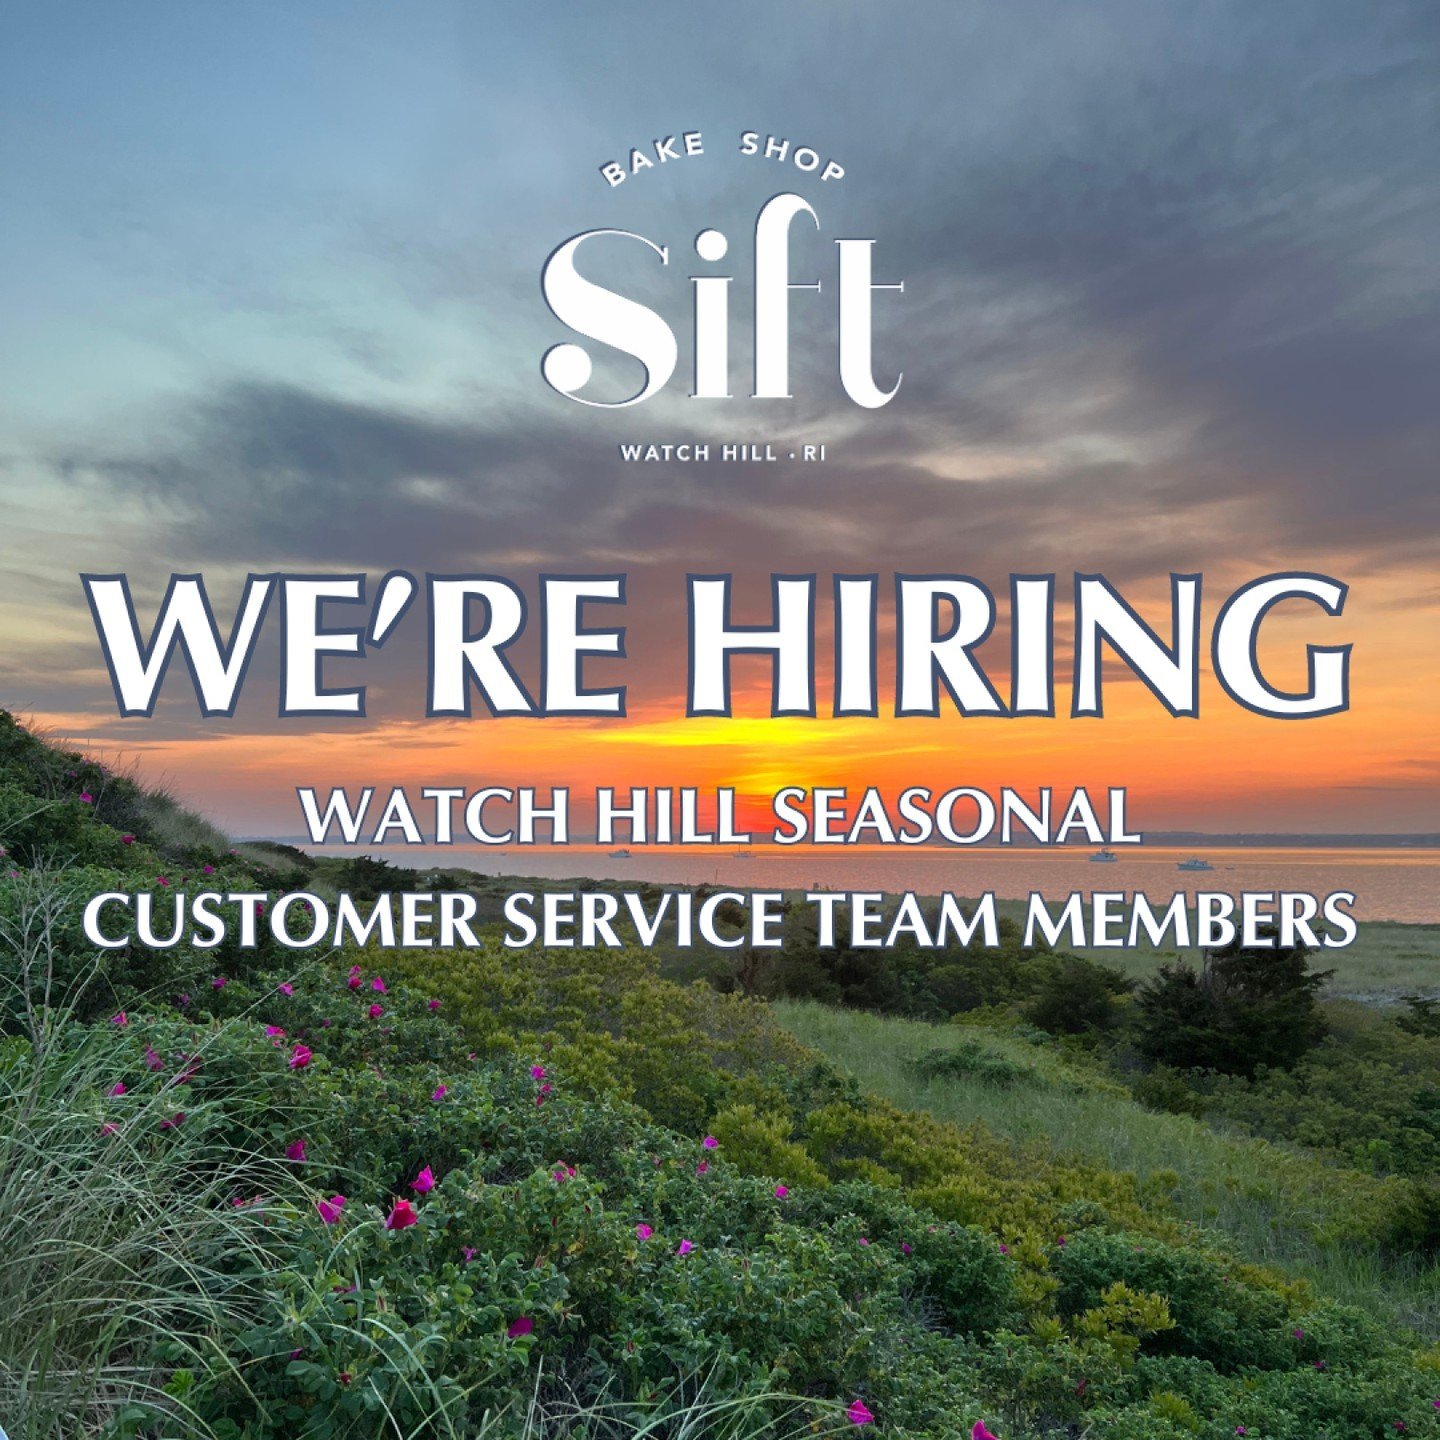 Calling all Rhode Island fans! Looking for a job this summer?! Sift Bake Shop Watch Hill is hiring seasonal customer service team members 🥐  Sift Watch Hill is open Memorial Day through Labor Day.

Please email hello@siftbakeshopmystic.com to apply!